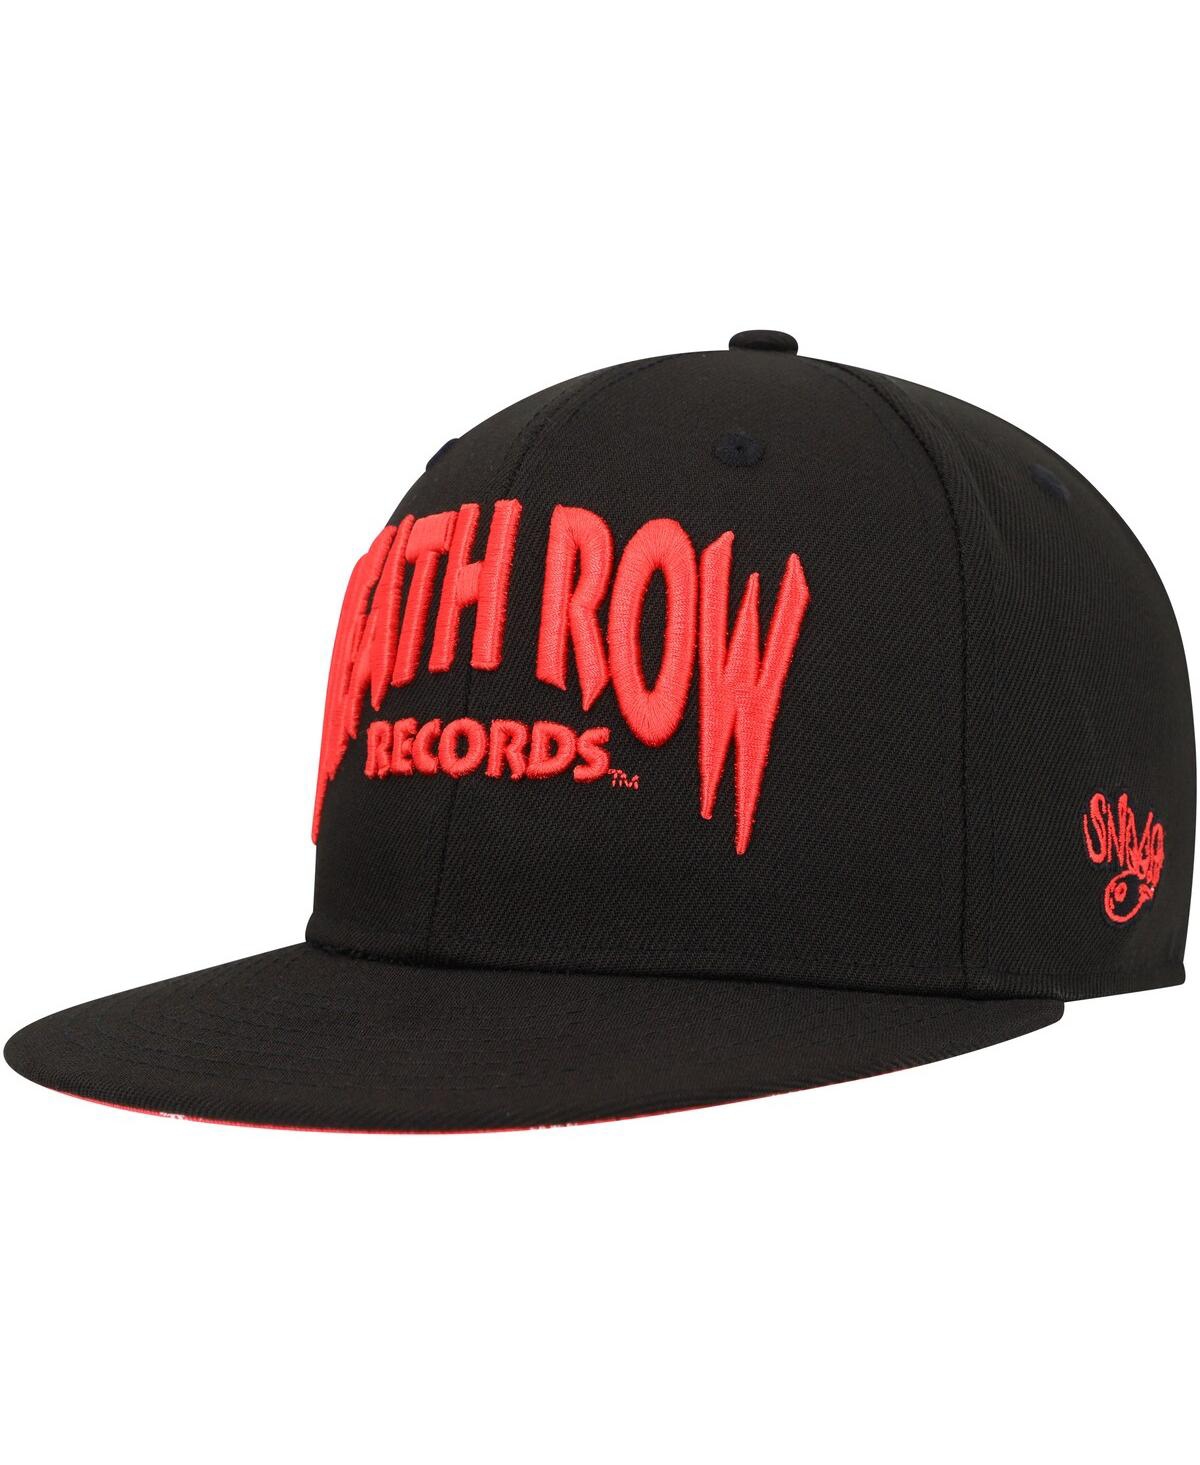 Lids Men's Black Death Row Records Paisley Fitted Hat